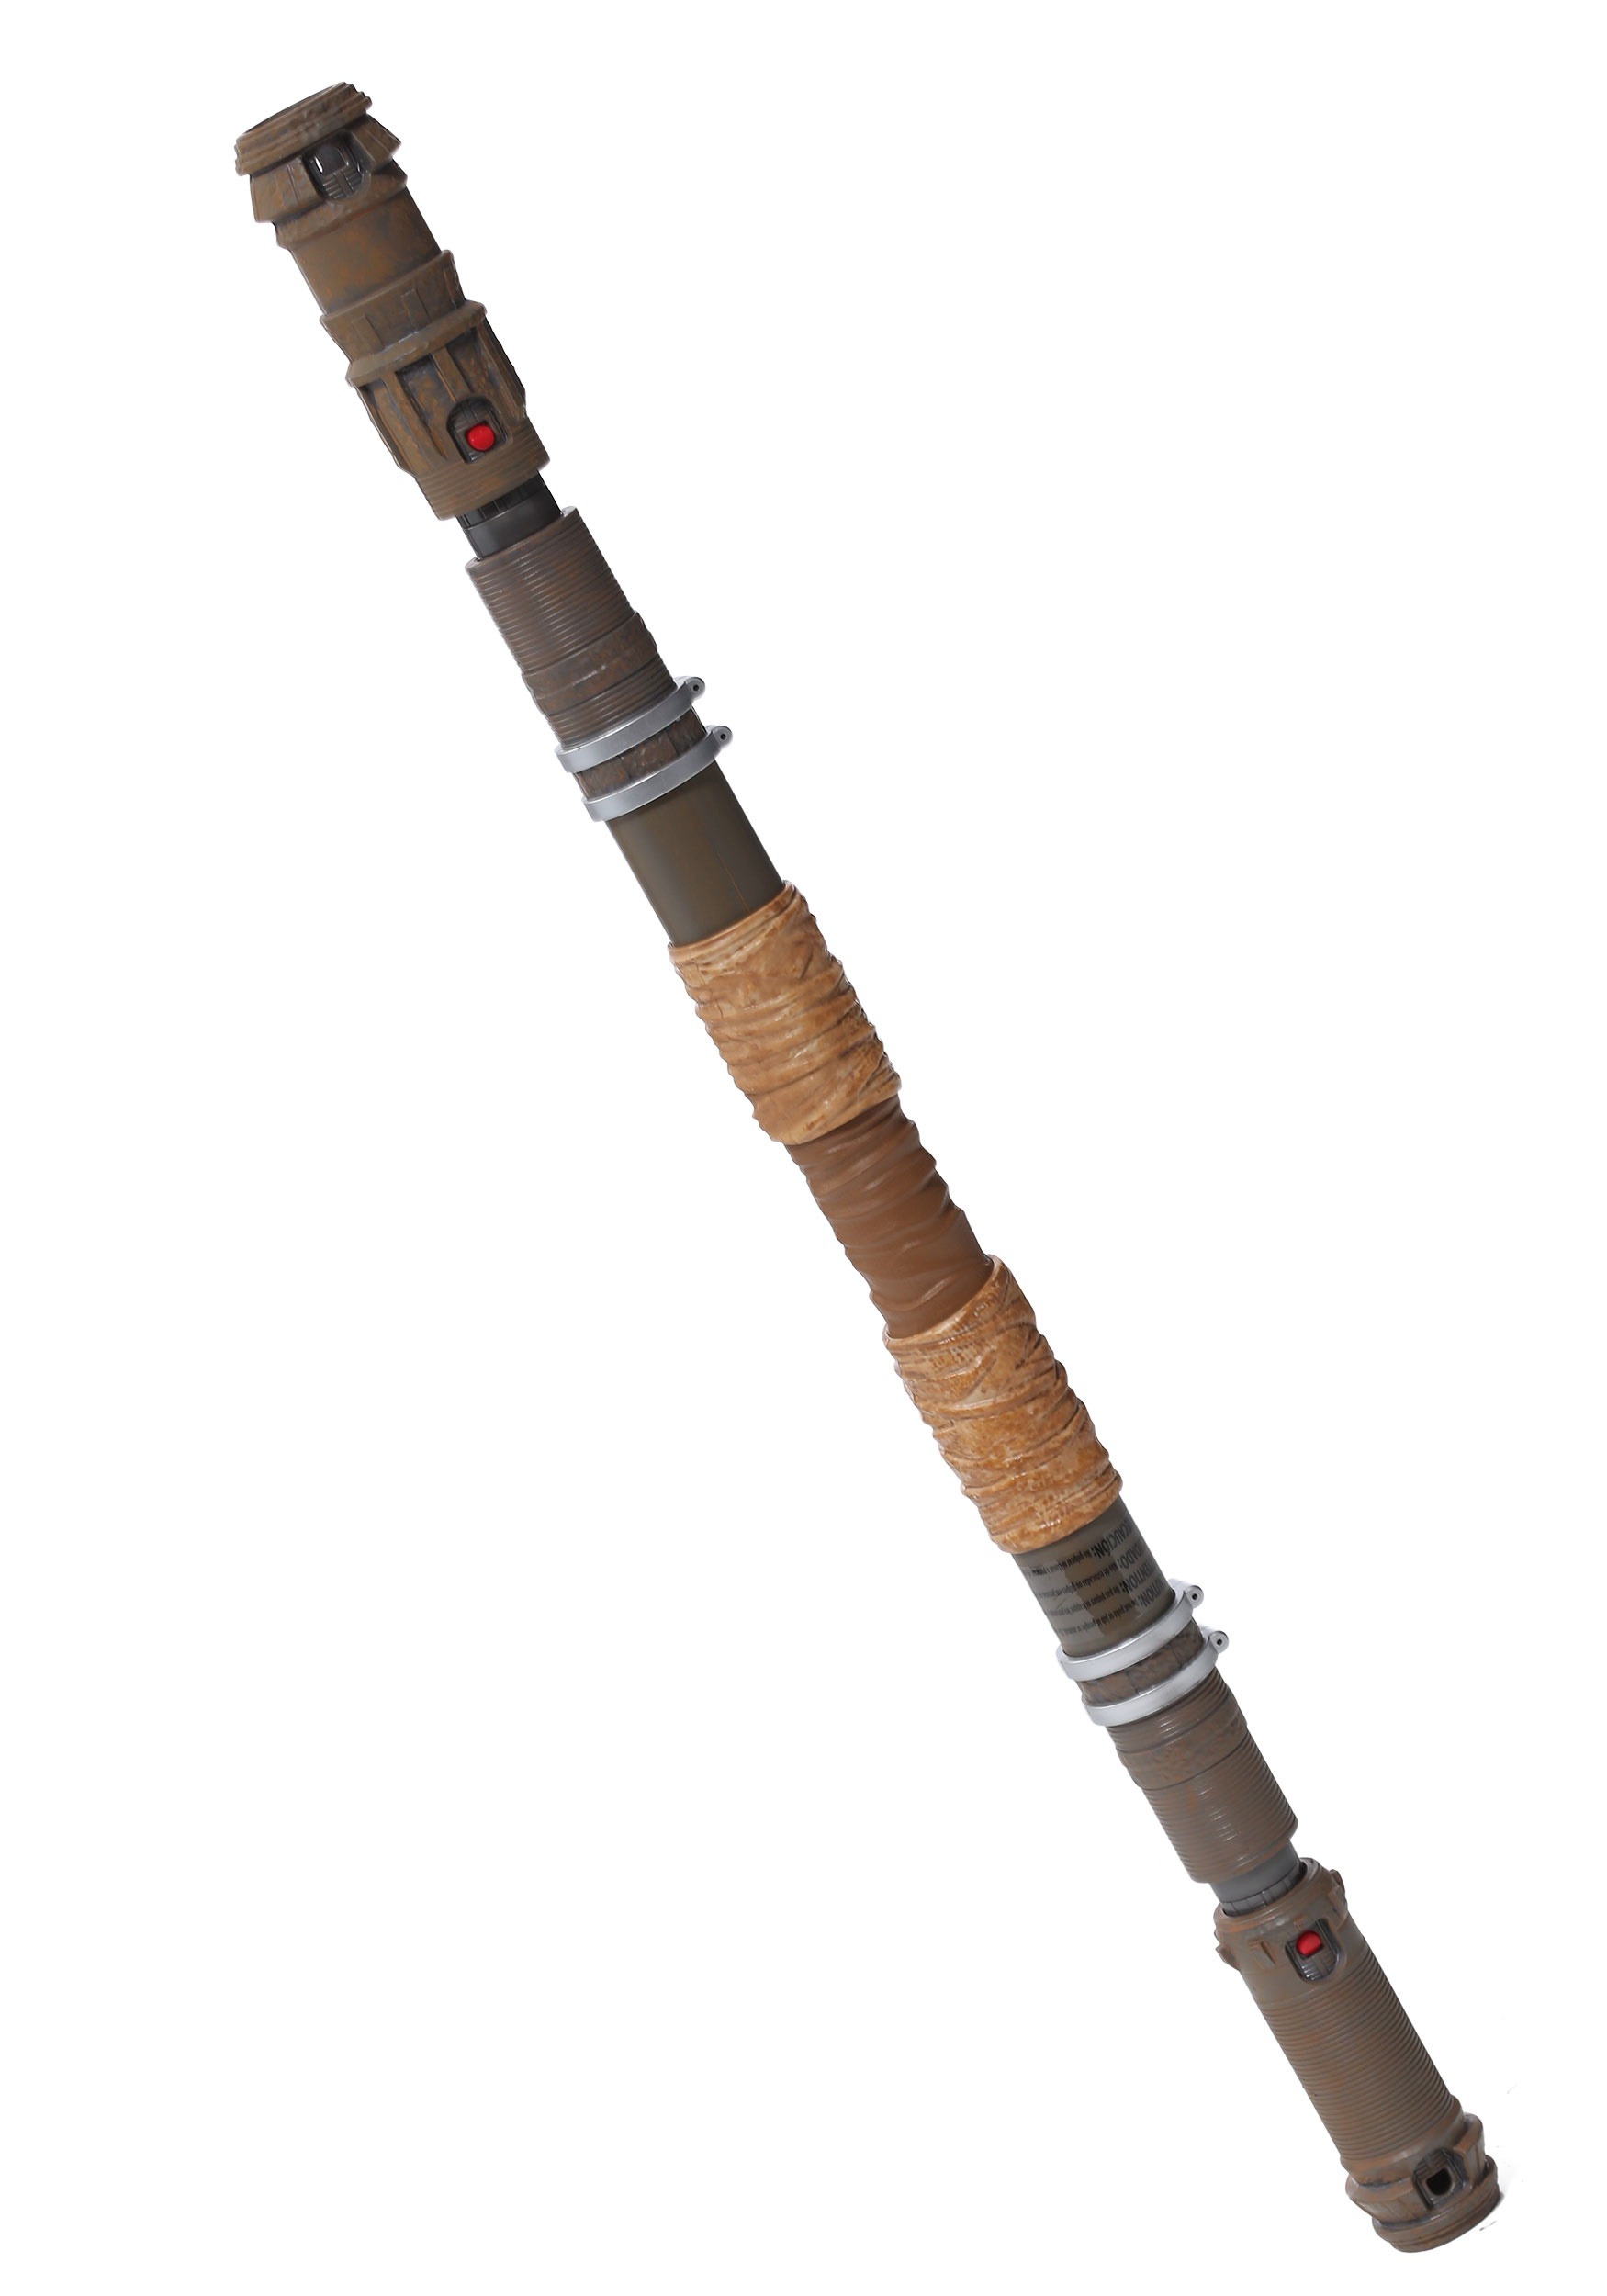 Star Wars Forces of Destiny Rey Extendable Staff